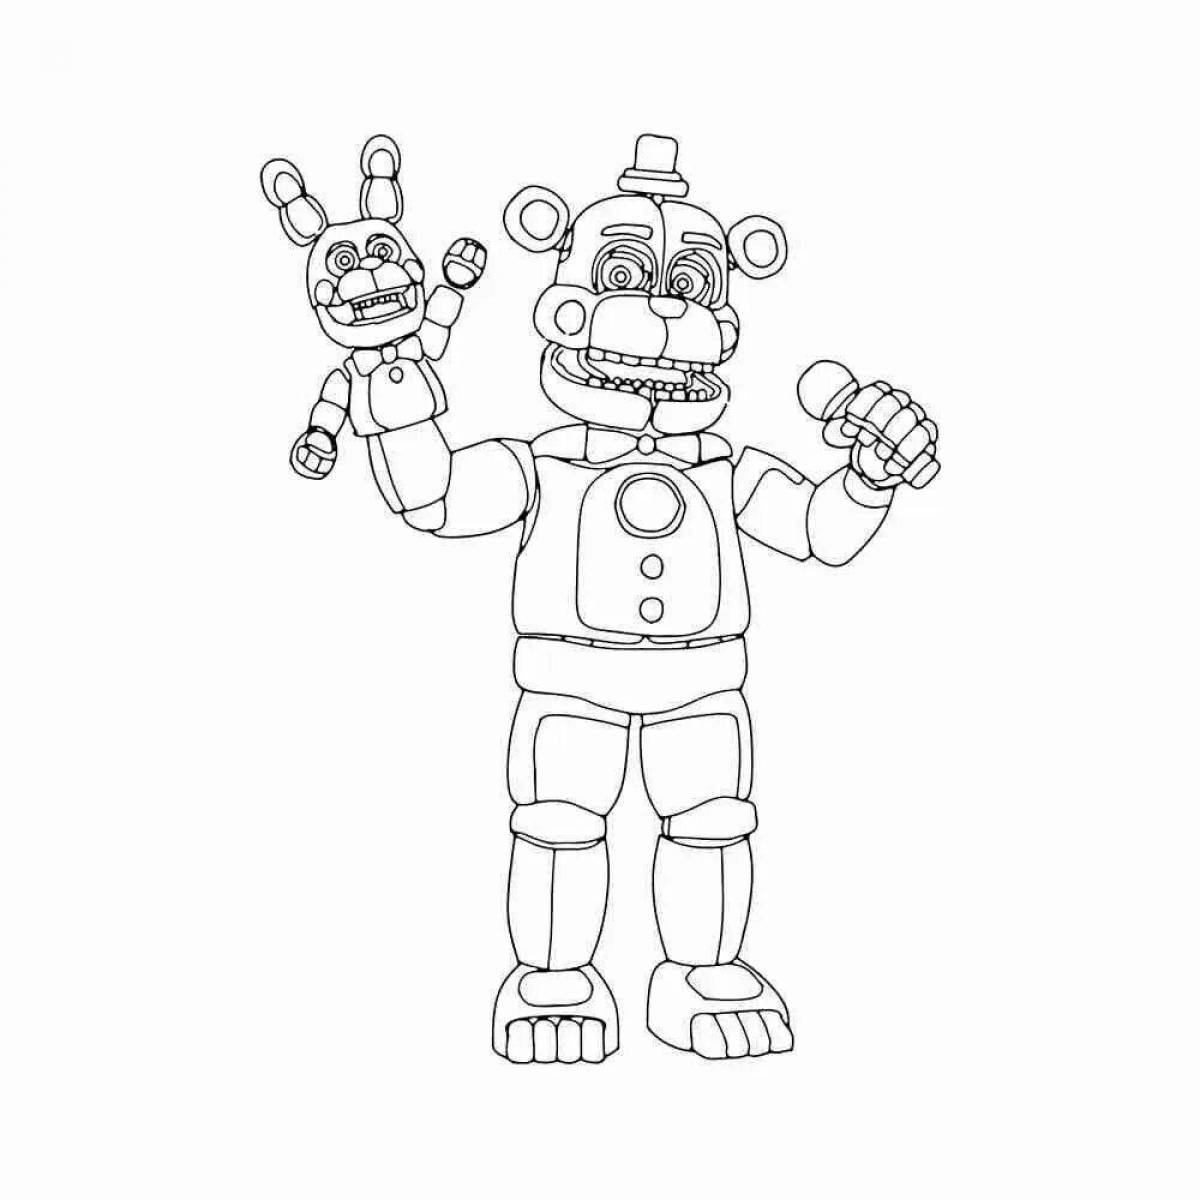 Coloring page adorable freddy bear